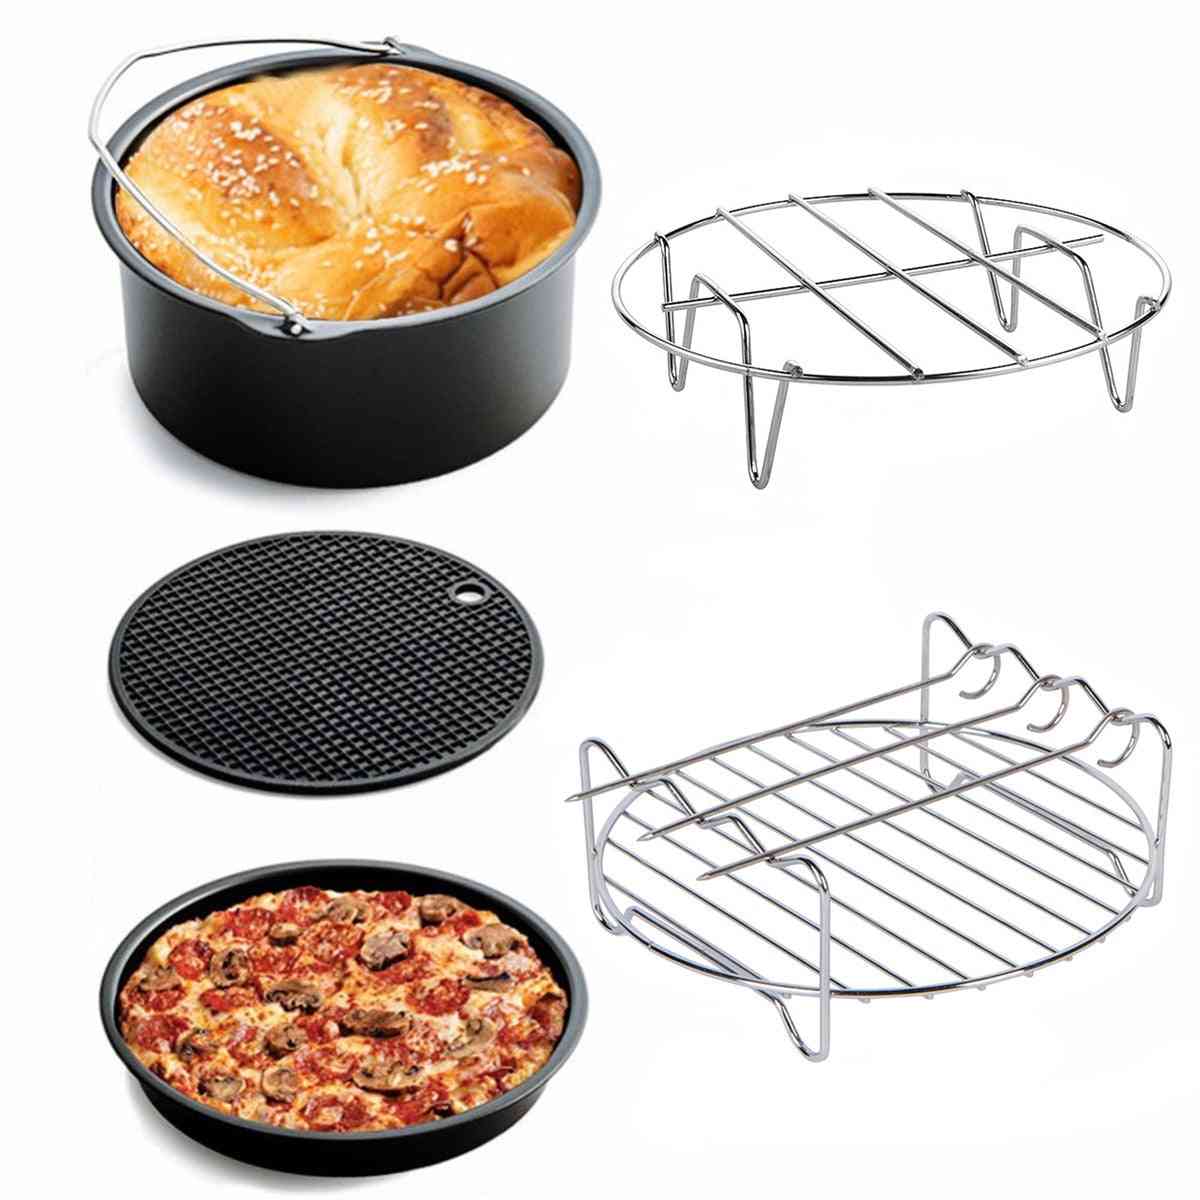 Cake Pizza, Cage Steaming, Frame Grill Insulation Pad, Air Fryer Accessories